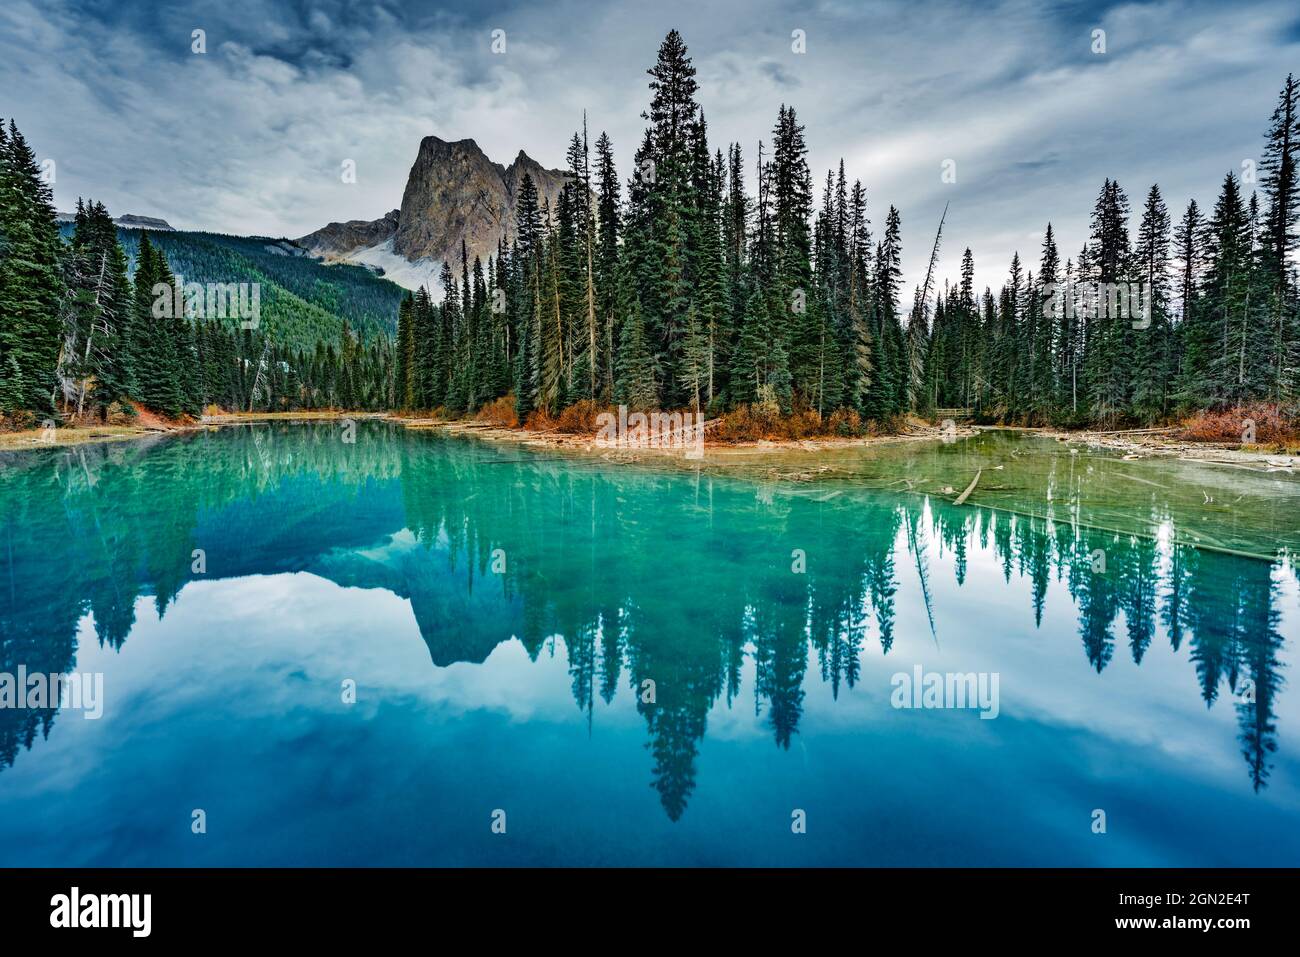 CANADA, ALBERTA, YOHO NATIONAL PARK, EMERALD LAKE. FOREST OF MELEZES REFLECTING IN EMERALD LAKE WITH THE CANADIAN ROCKIES IN THE BACKGROUND Stock Photo